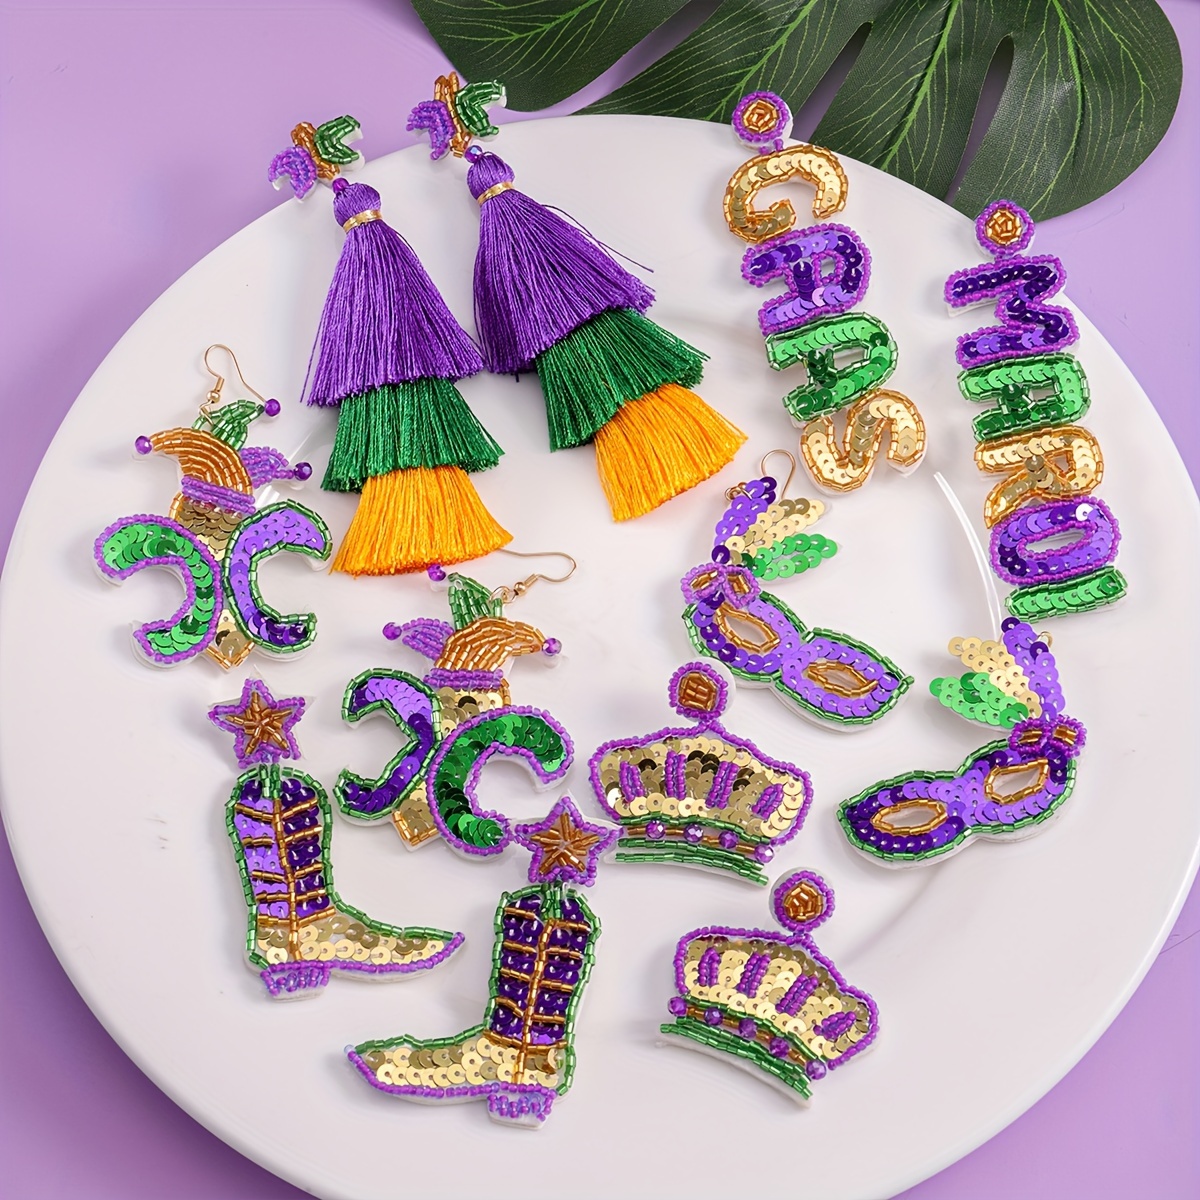 Mardi Gras Feather Design Ornament with Jewels